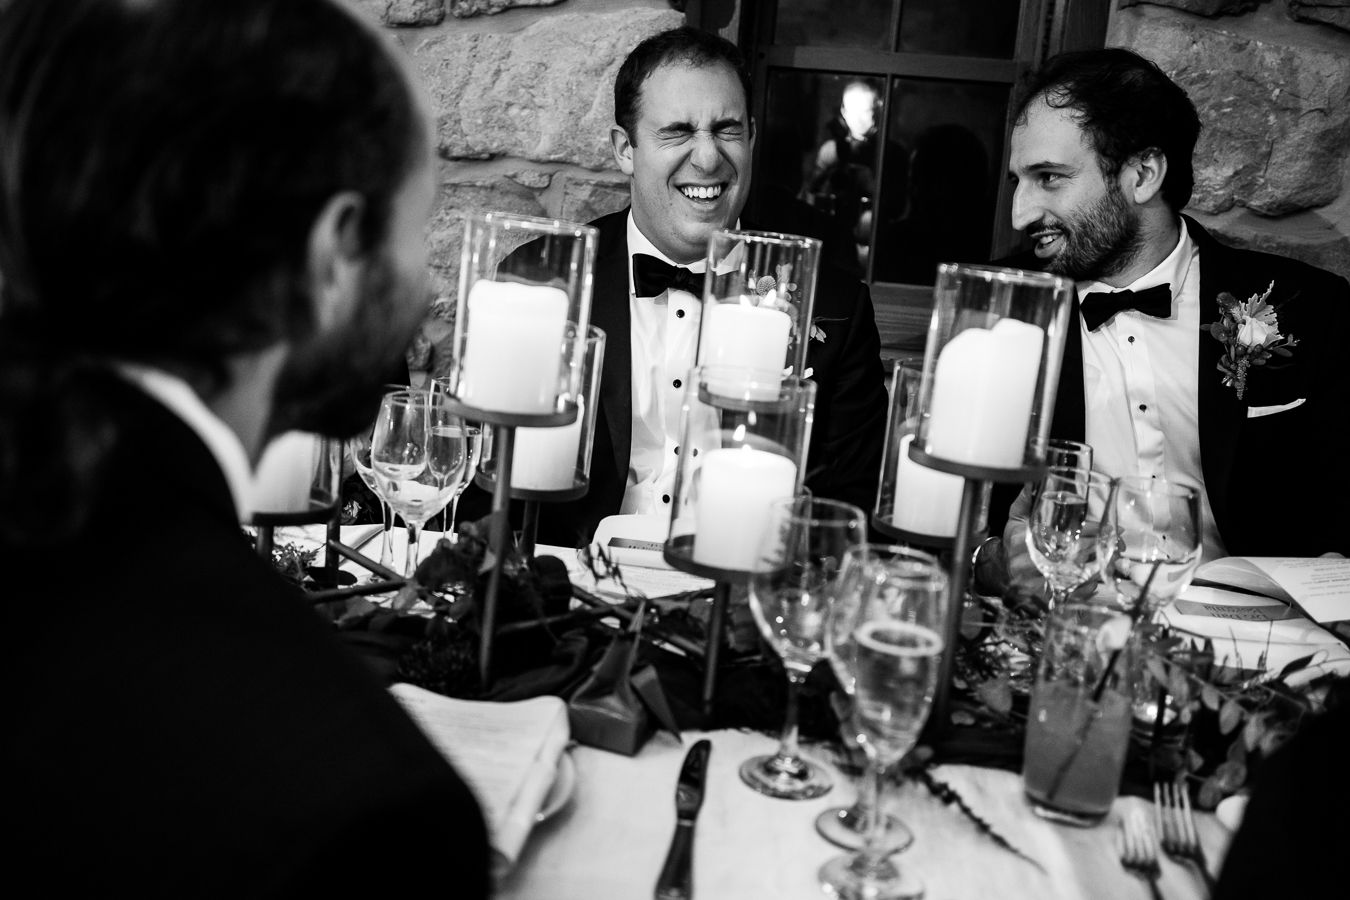 Elizabeth Furnace Wedding photographer, lisa rhinehart, captures this black and white image of the groomsmen as they laugh and smile during the speeches at this indoor wedding reception 